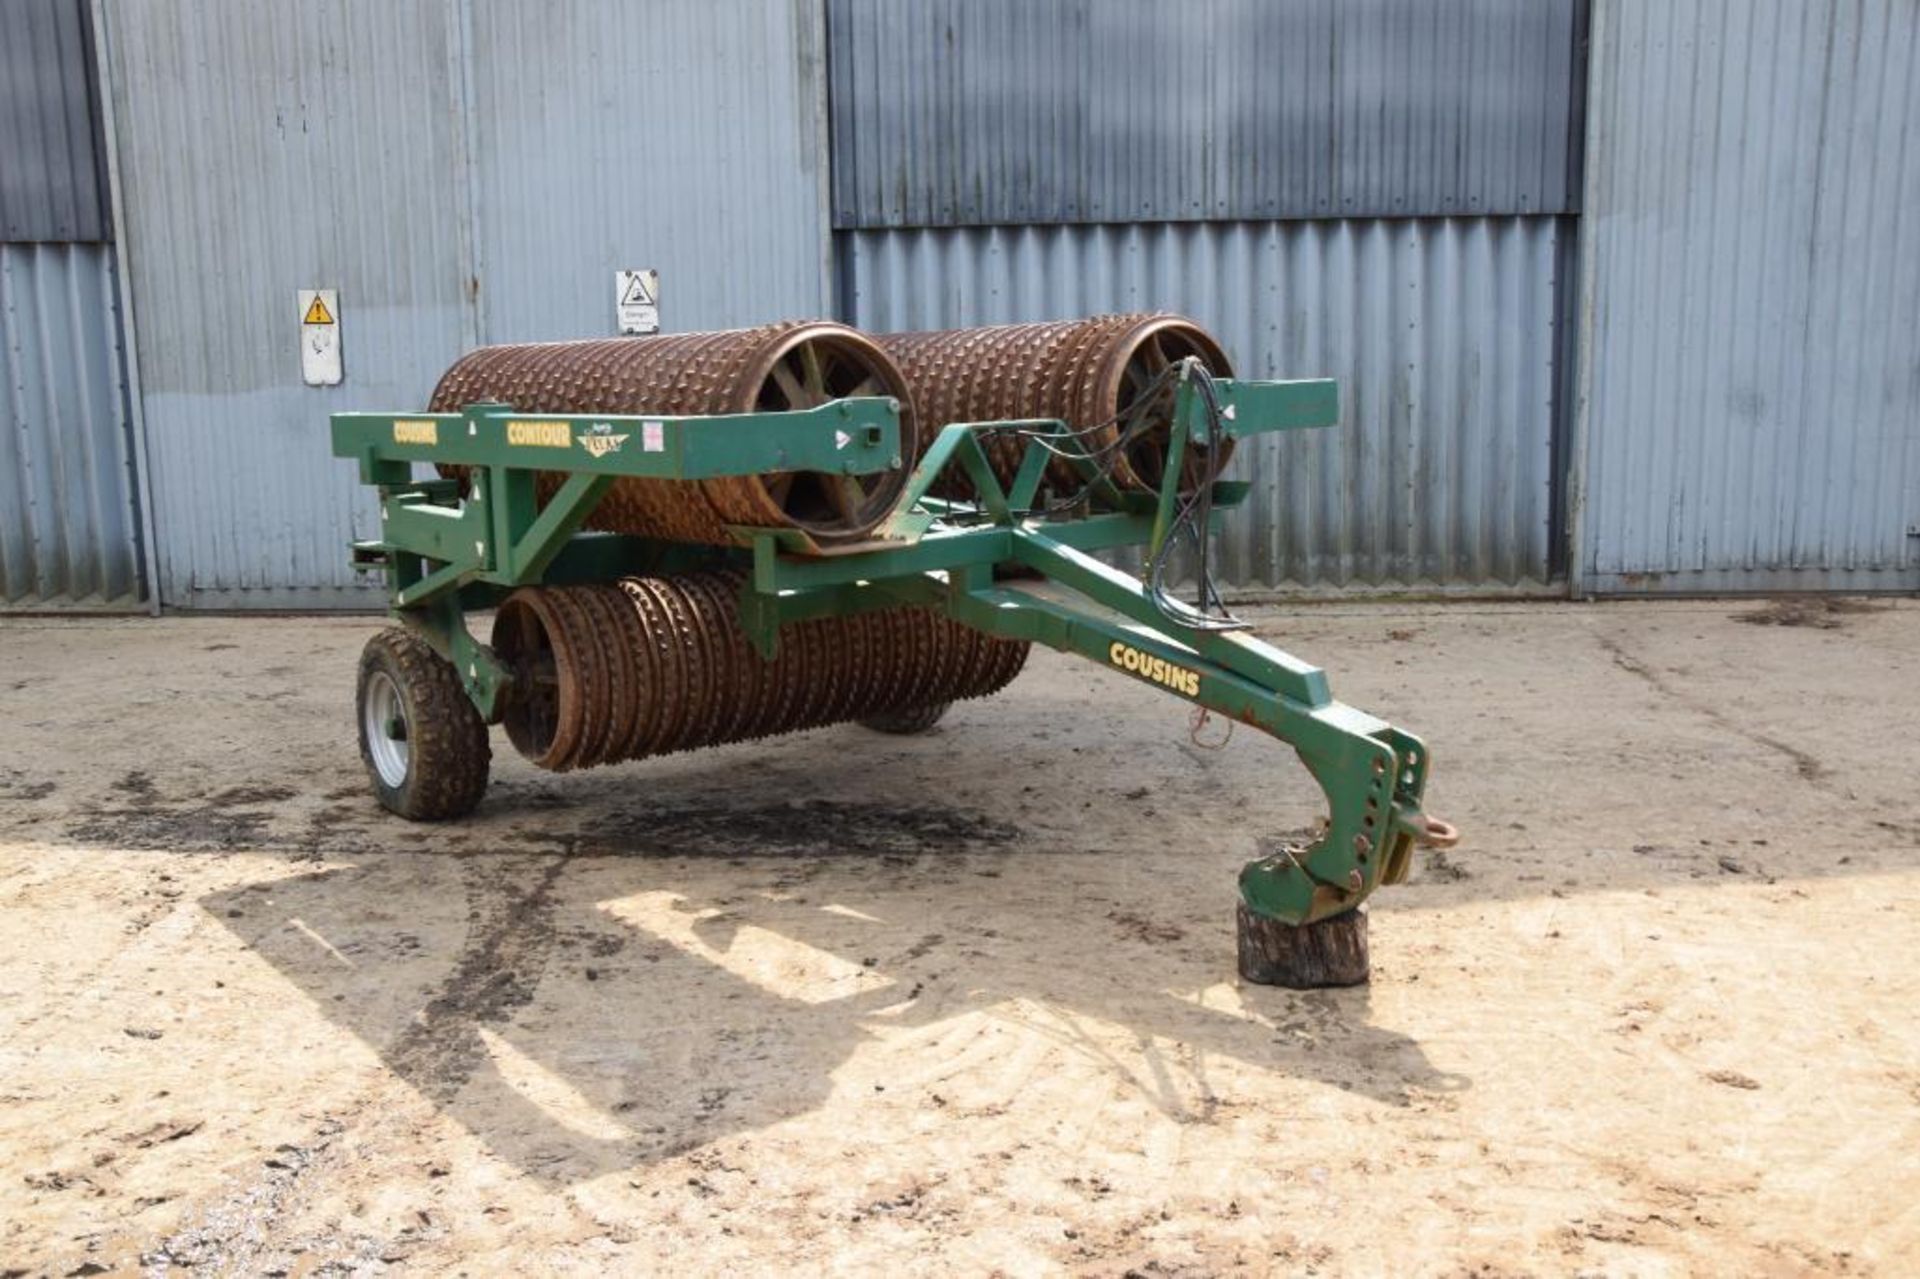 2010 Cousins Contour 6.3m horizontal folding cambridge rolls with breaker rings. Serial No: 2010066 - Image 8 of 16